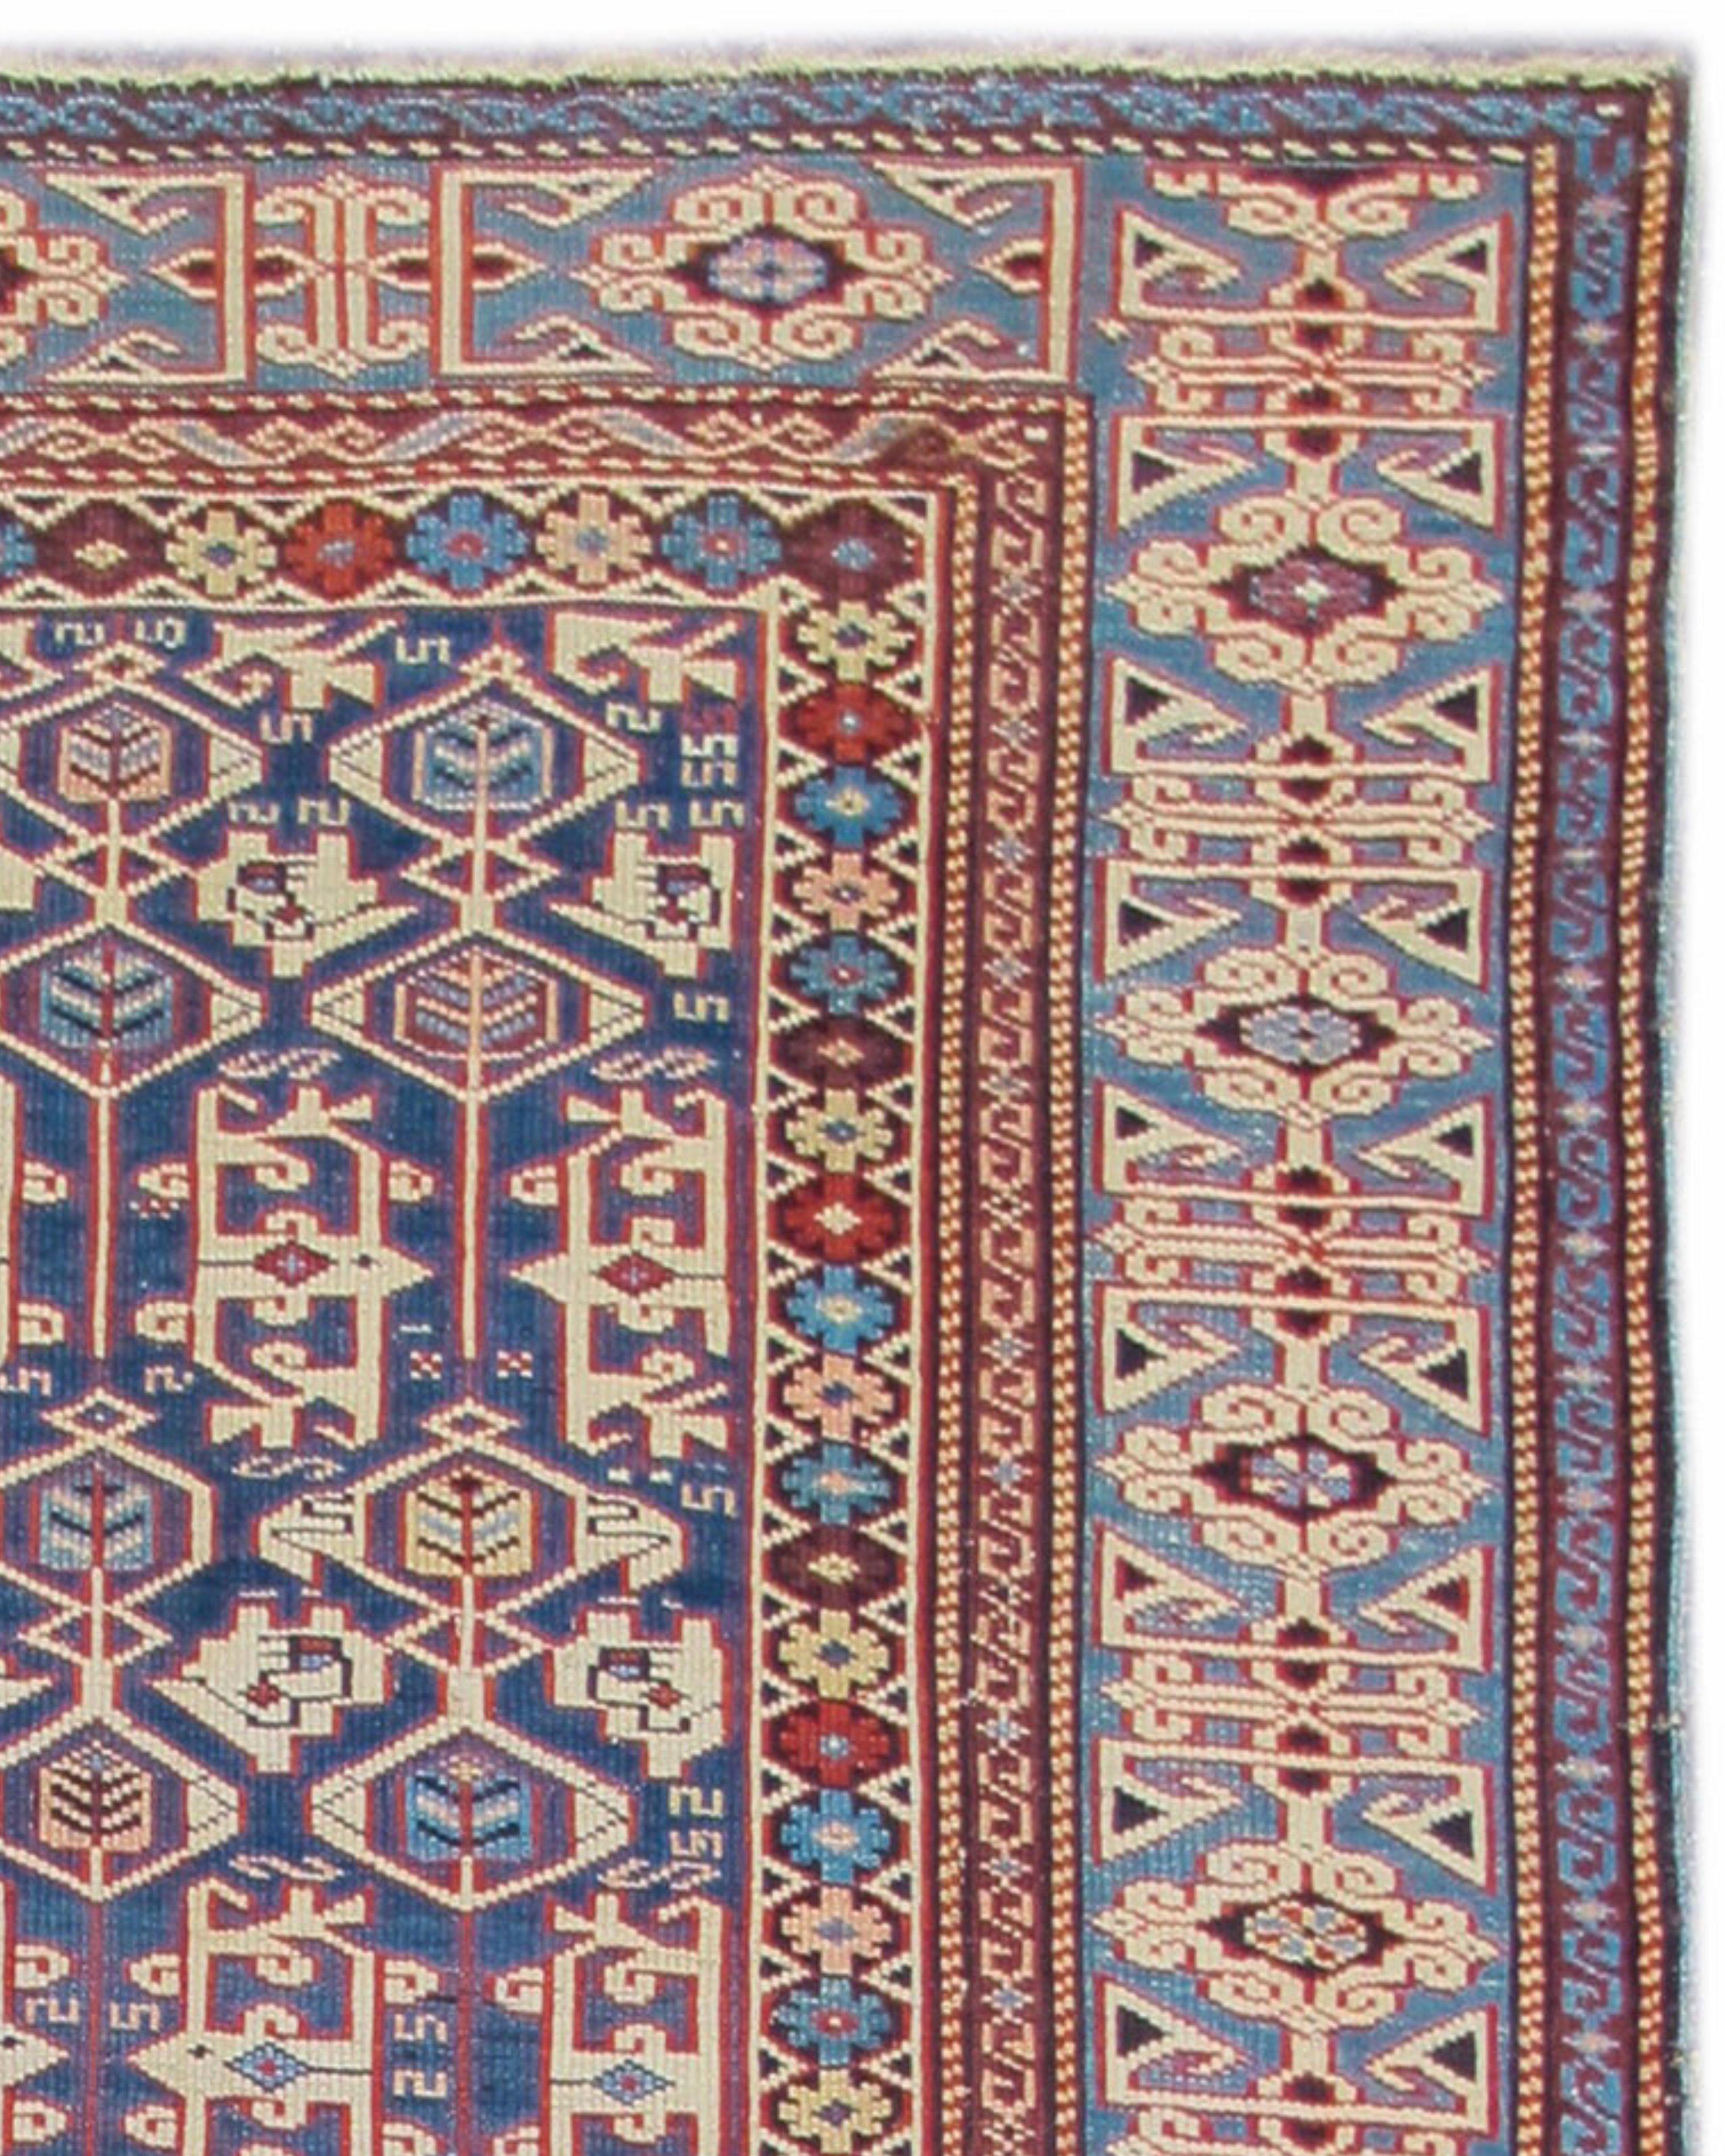 Antique Caucasian Kuba Rug, 19th Century (4th Quarter)

While decidedly Caucasian in style, color, and weave, both the field design and border of this iconic Kuba rug may be traced back to classical prototypes of the 16th century and before. Against